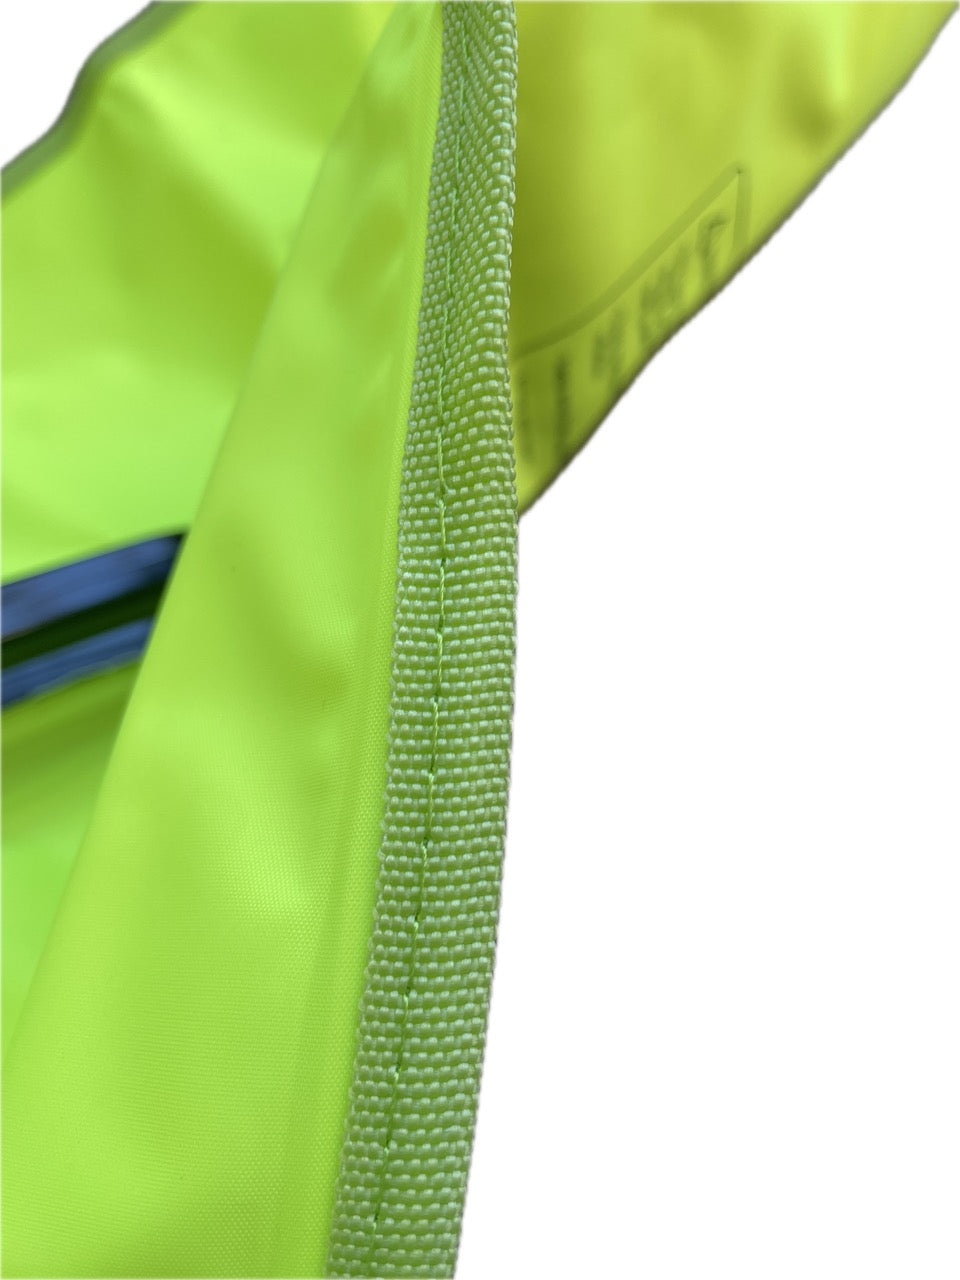 The Shine - The Ruby Fresh Inflatable Safety Tow Buoy - Glaring Green